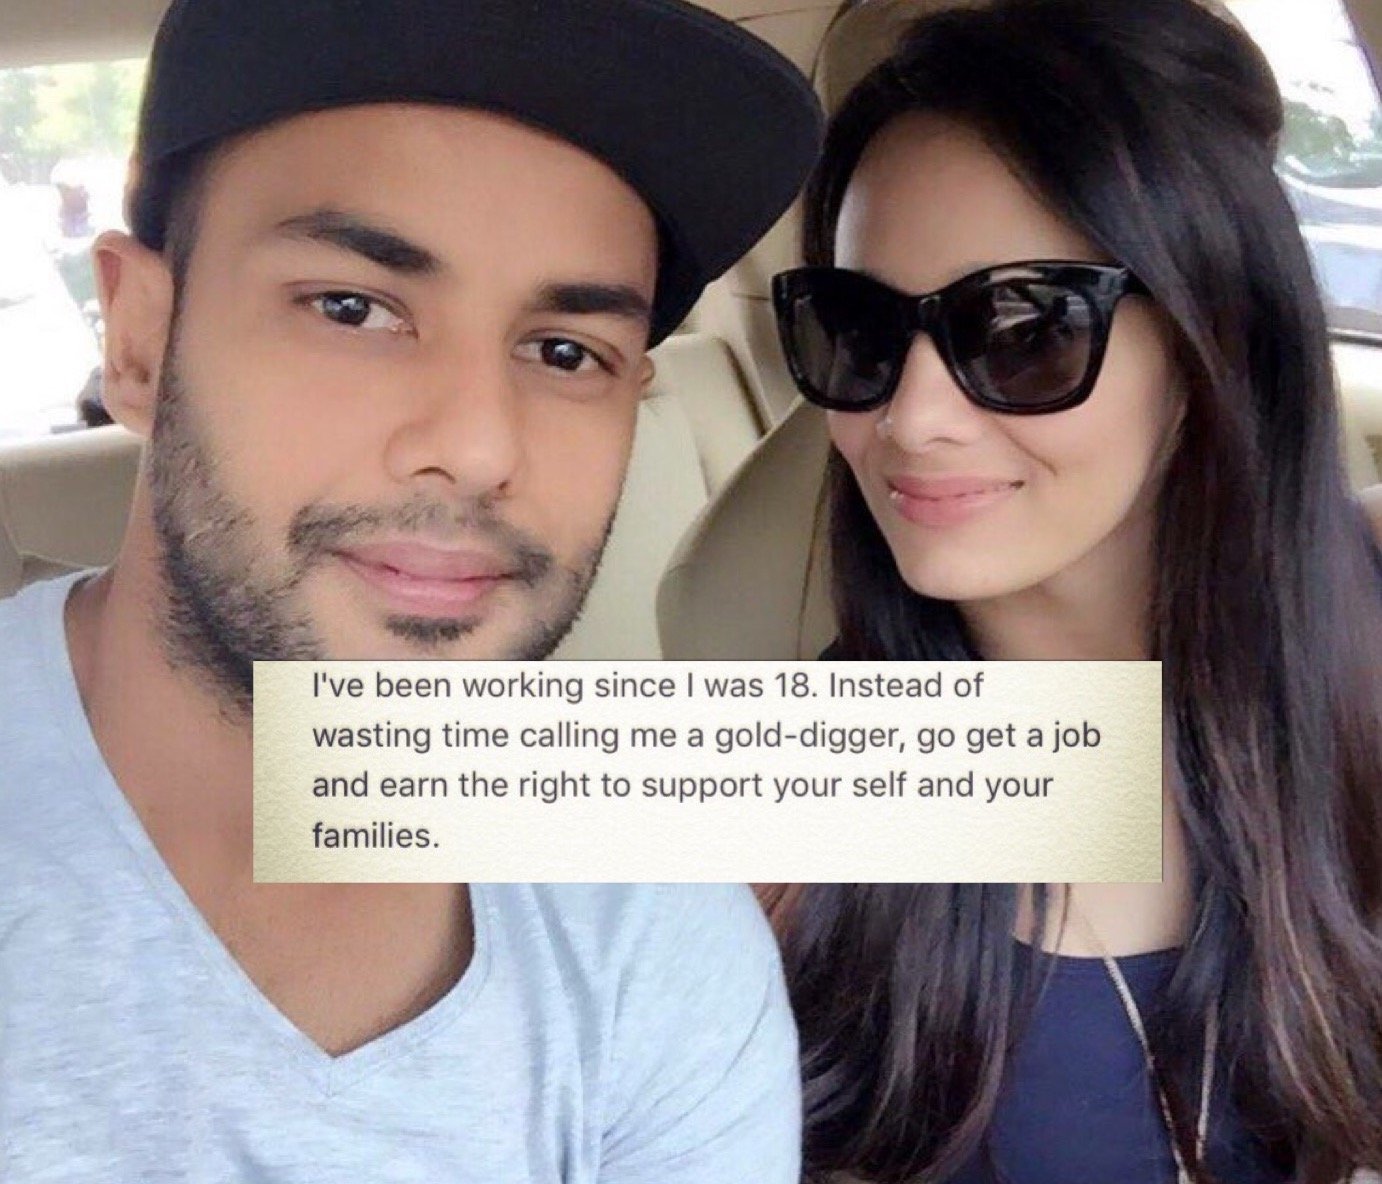 Stuart Binnys Wife Mayanti Langer Has The Perfect Response To Trolls Who Called Her A Gold-Digger HuffPost Entertainment pic